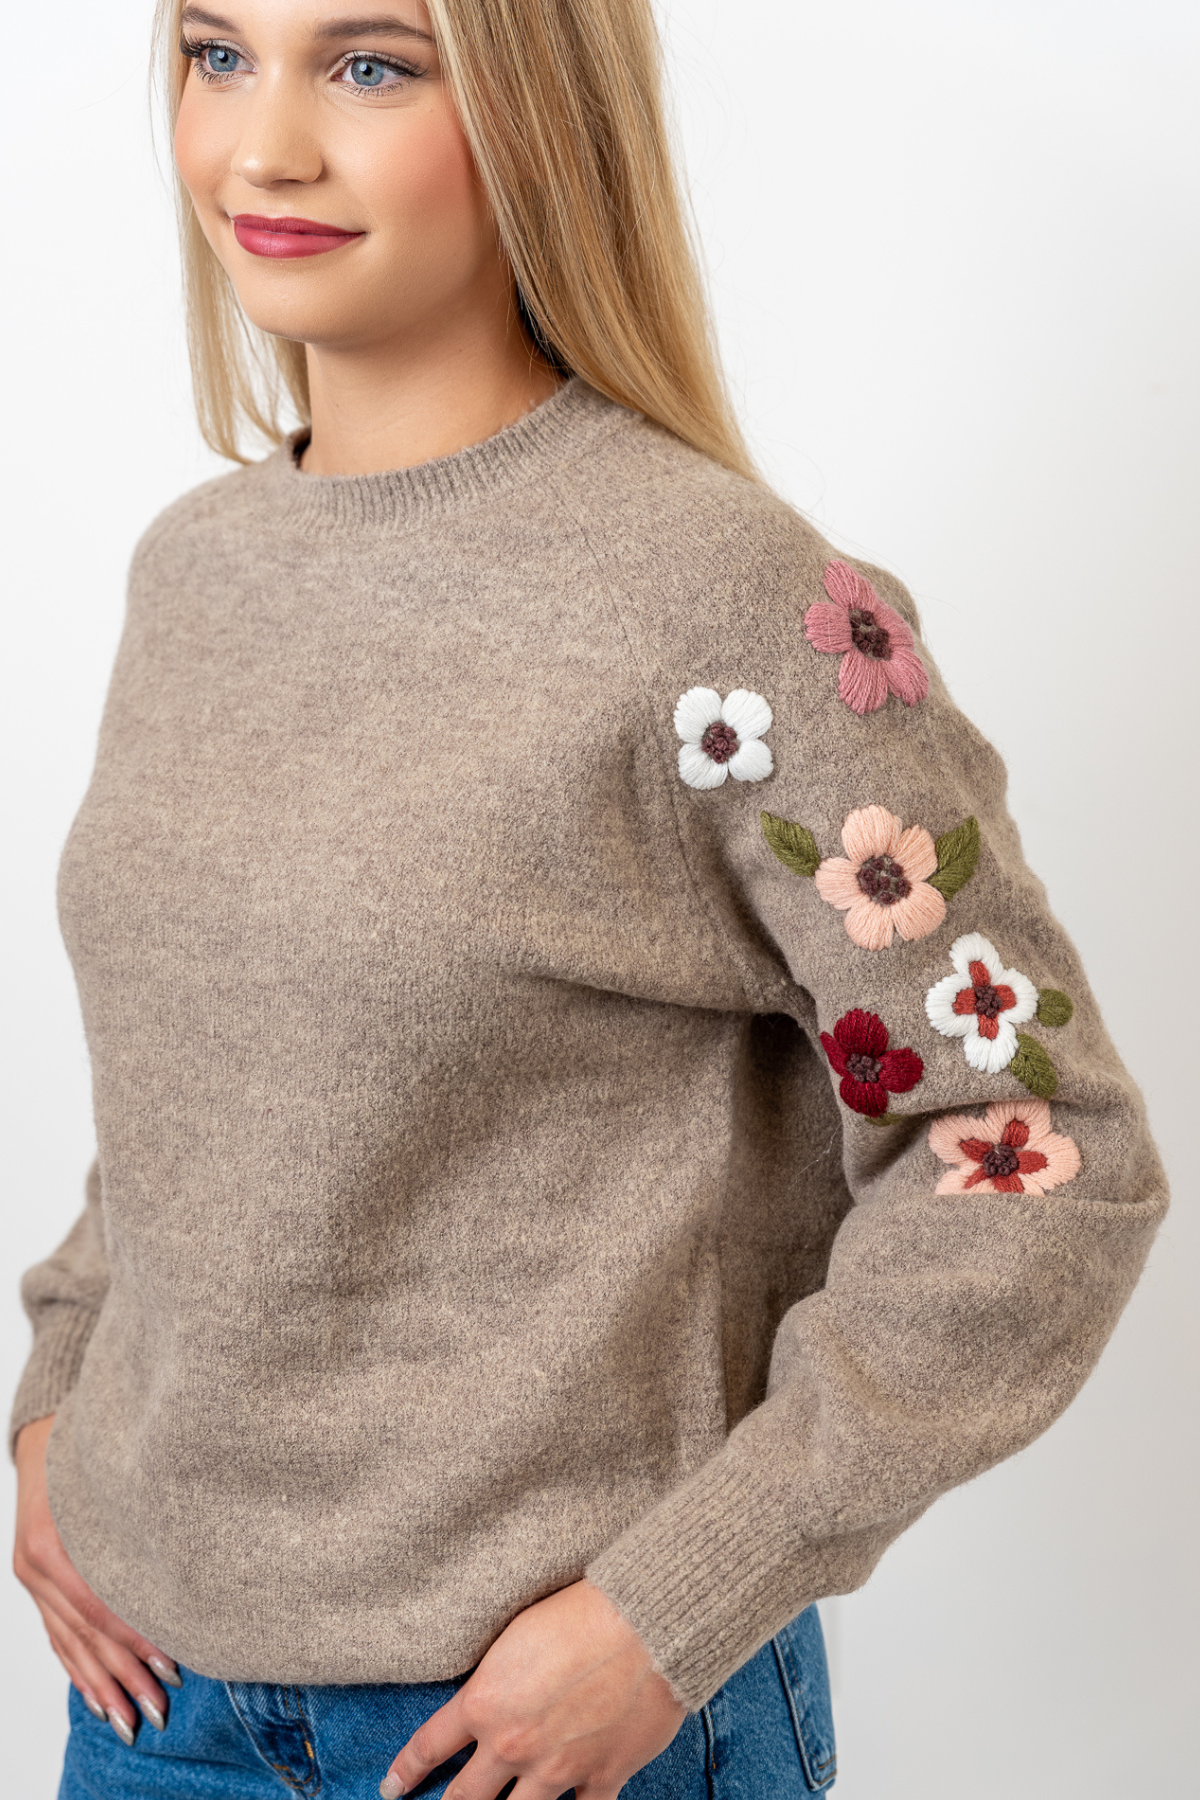 The Evangeline Embroidered Sweater